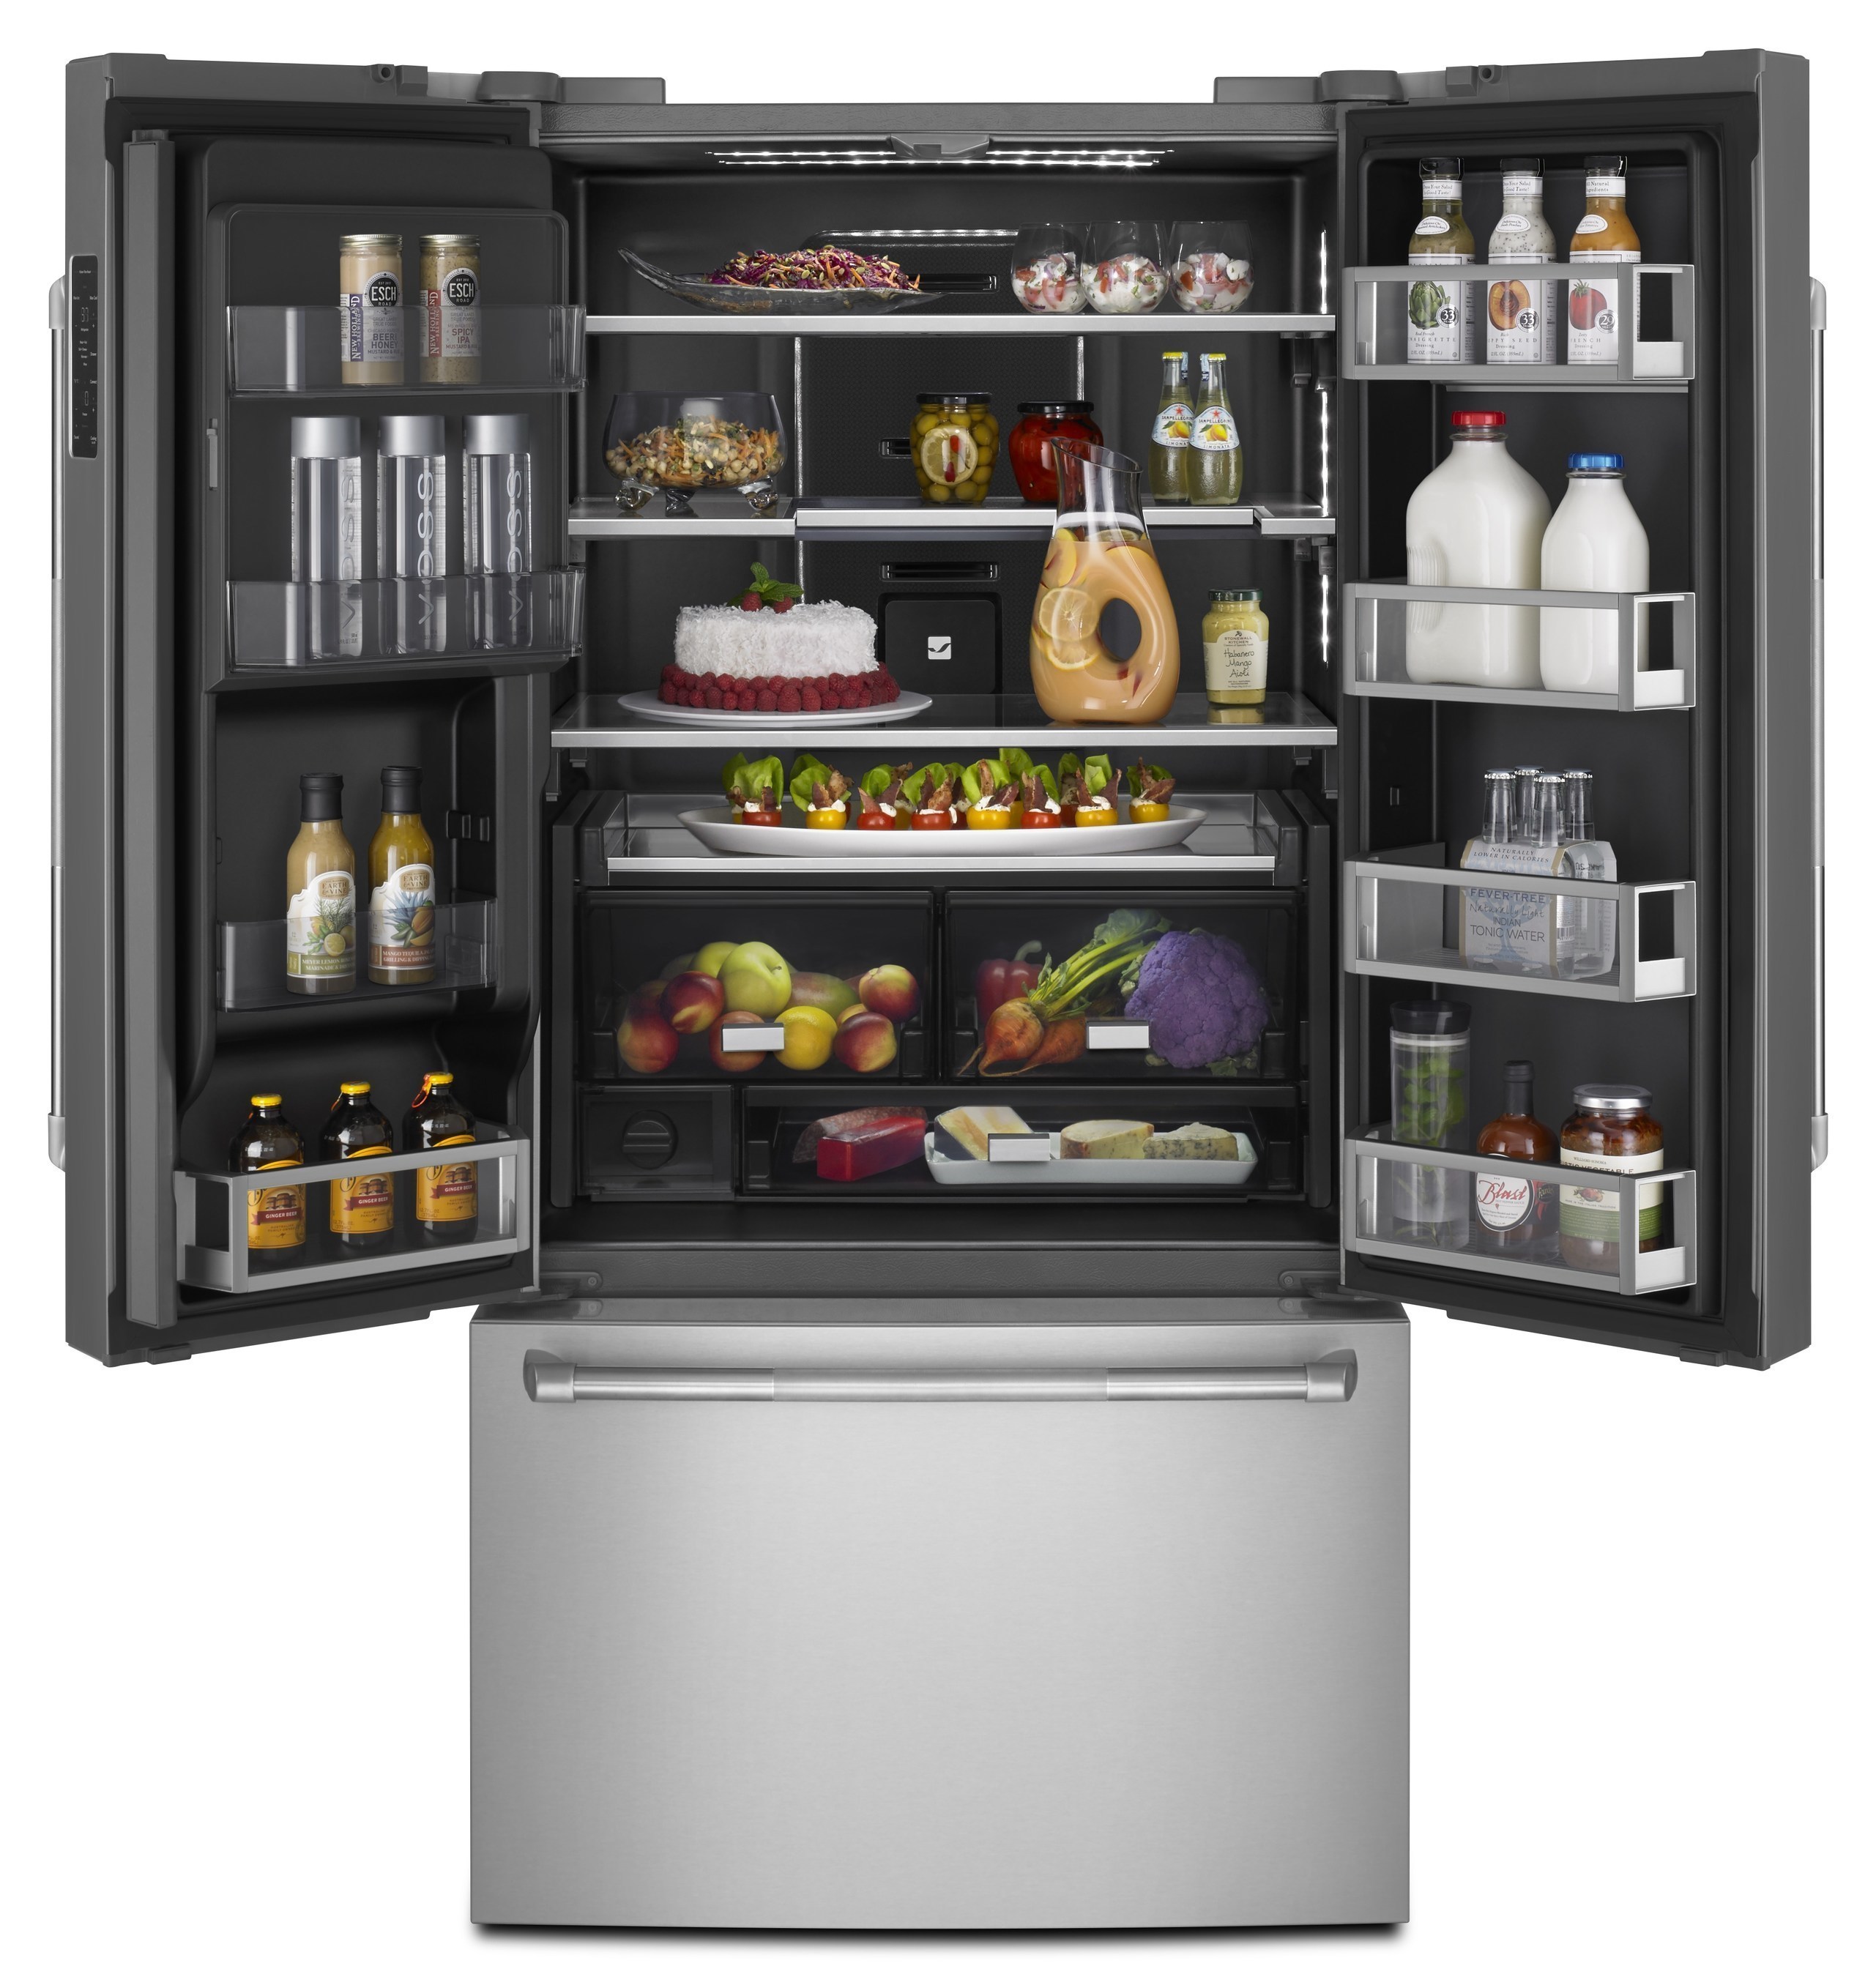 The brand's first Wi-Fi connected refrigerator with Obsidian interior